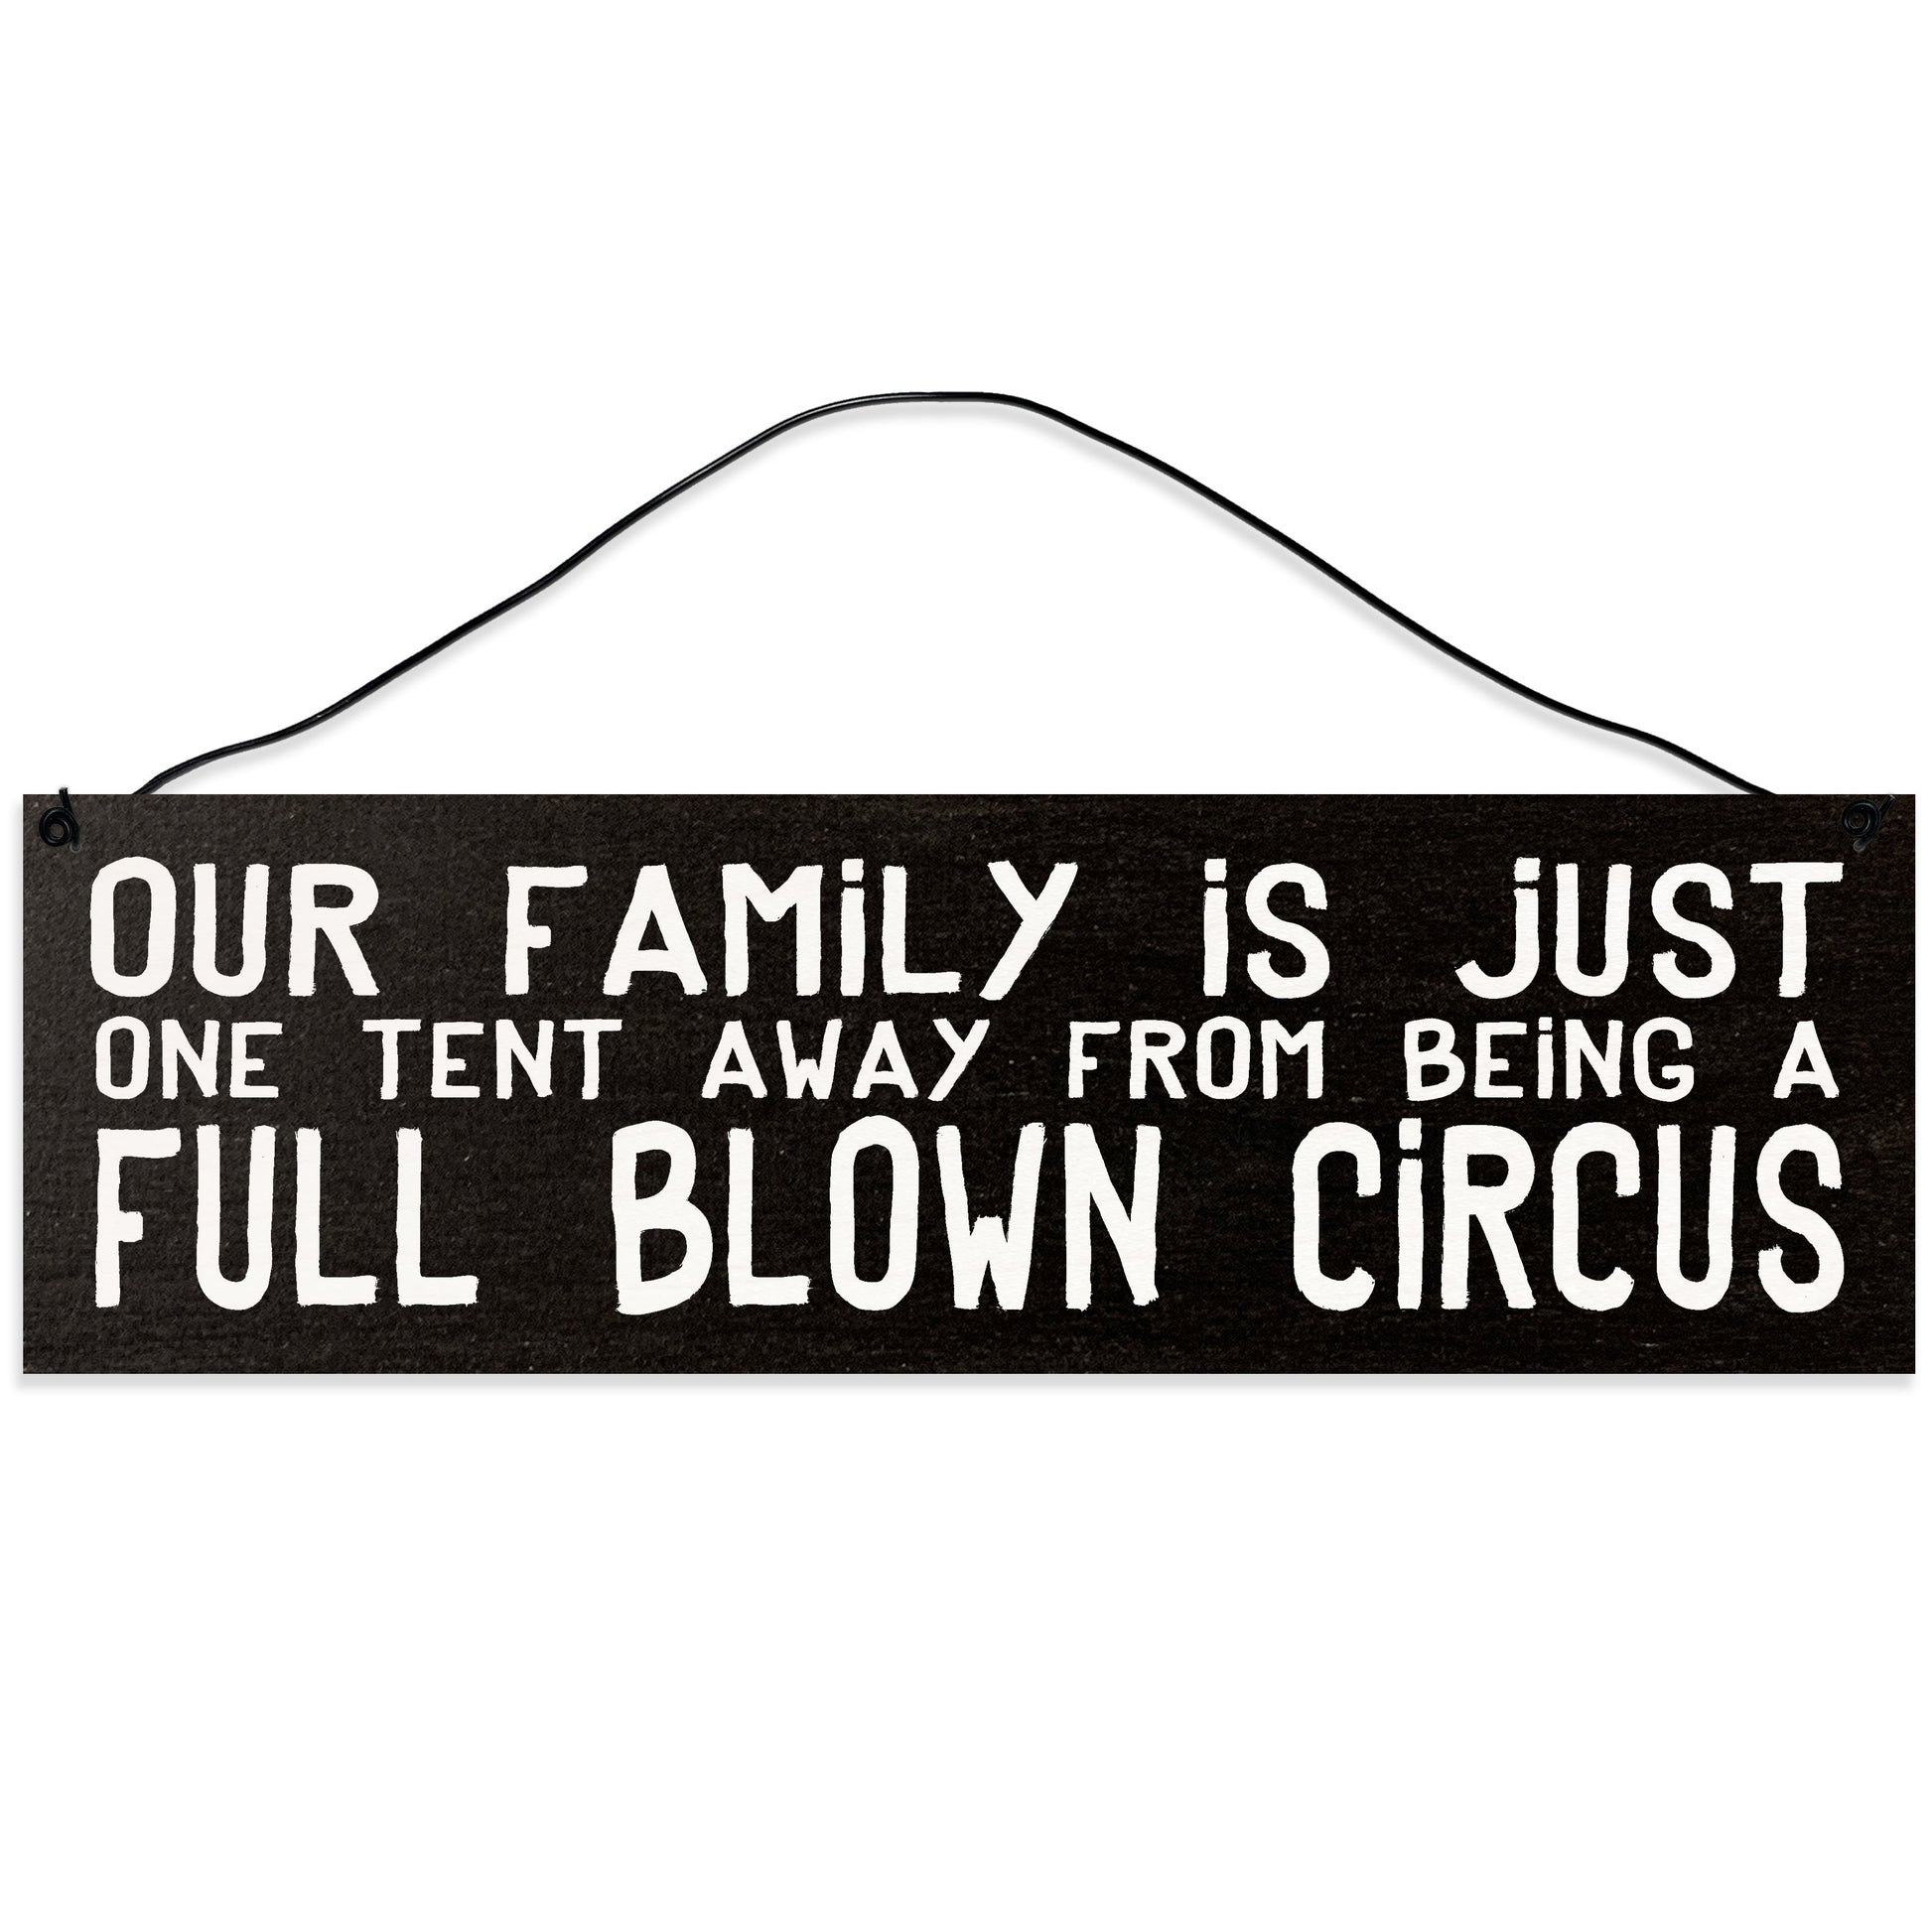 Sawyer's Mill - Our Family is just One Tent Away from Being a Full Blown Circus. Wood Sign for Home or Office. Measures 3x10 inches.